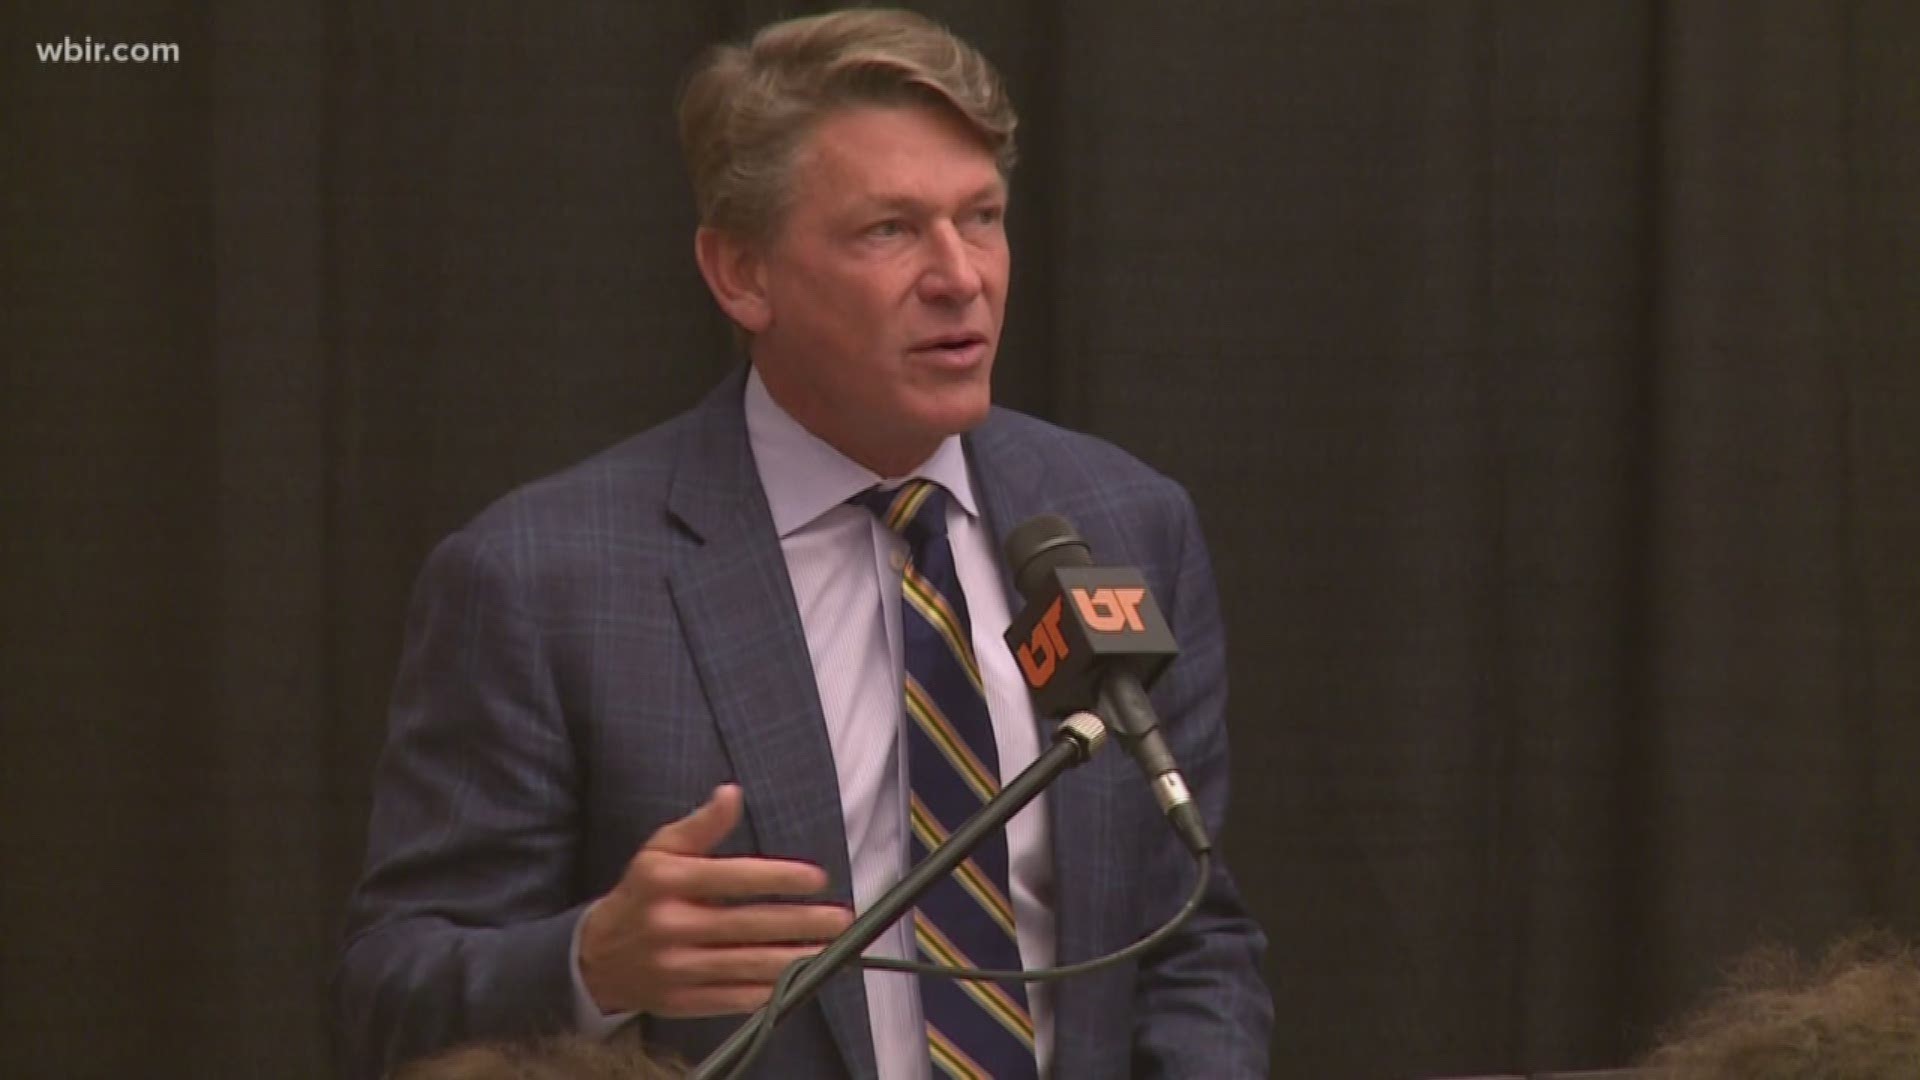 Knoxville businessman Randy Boyd was selected as the interim president of the University of Tennessee. Those against his appointment said they worried about his stance on equality.